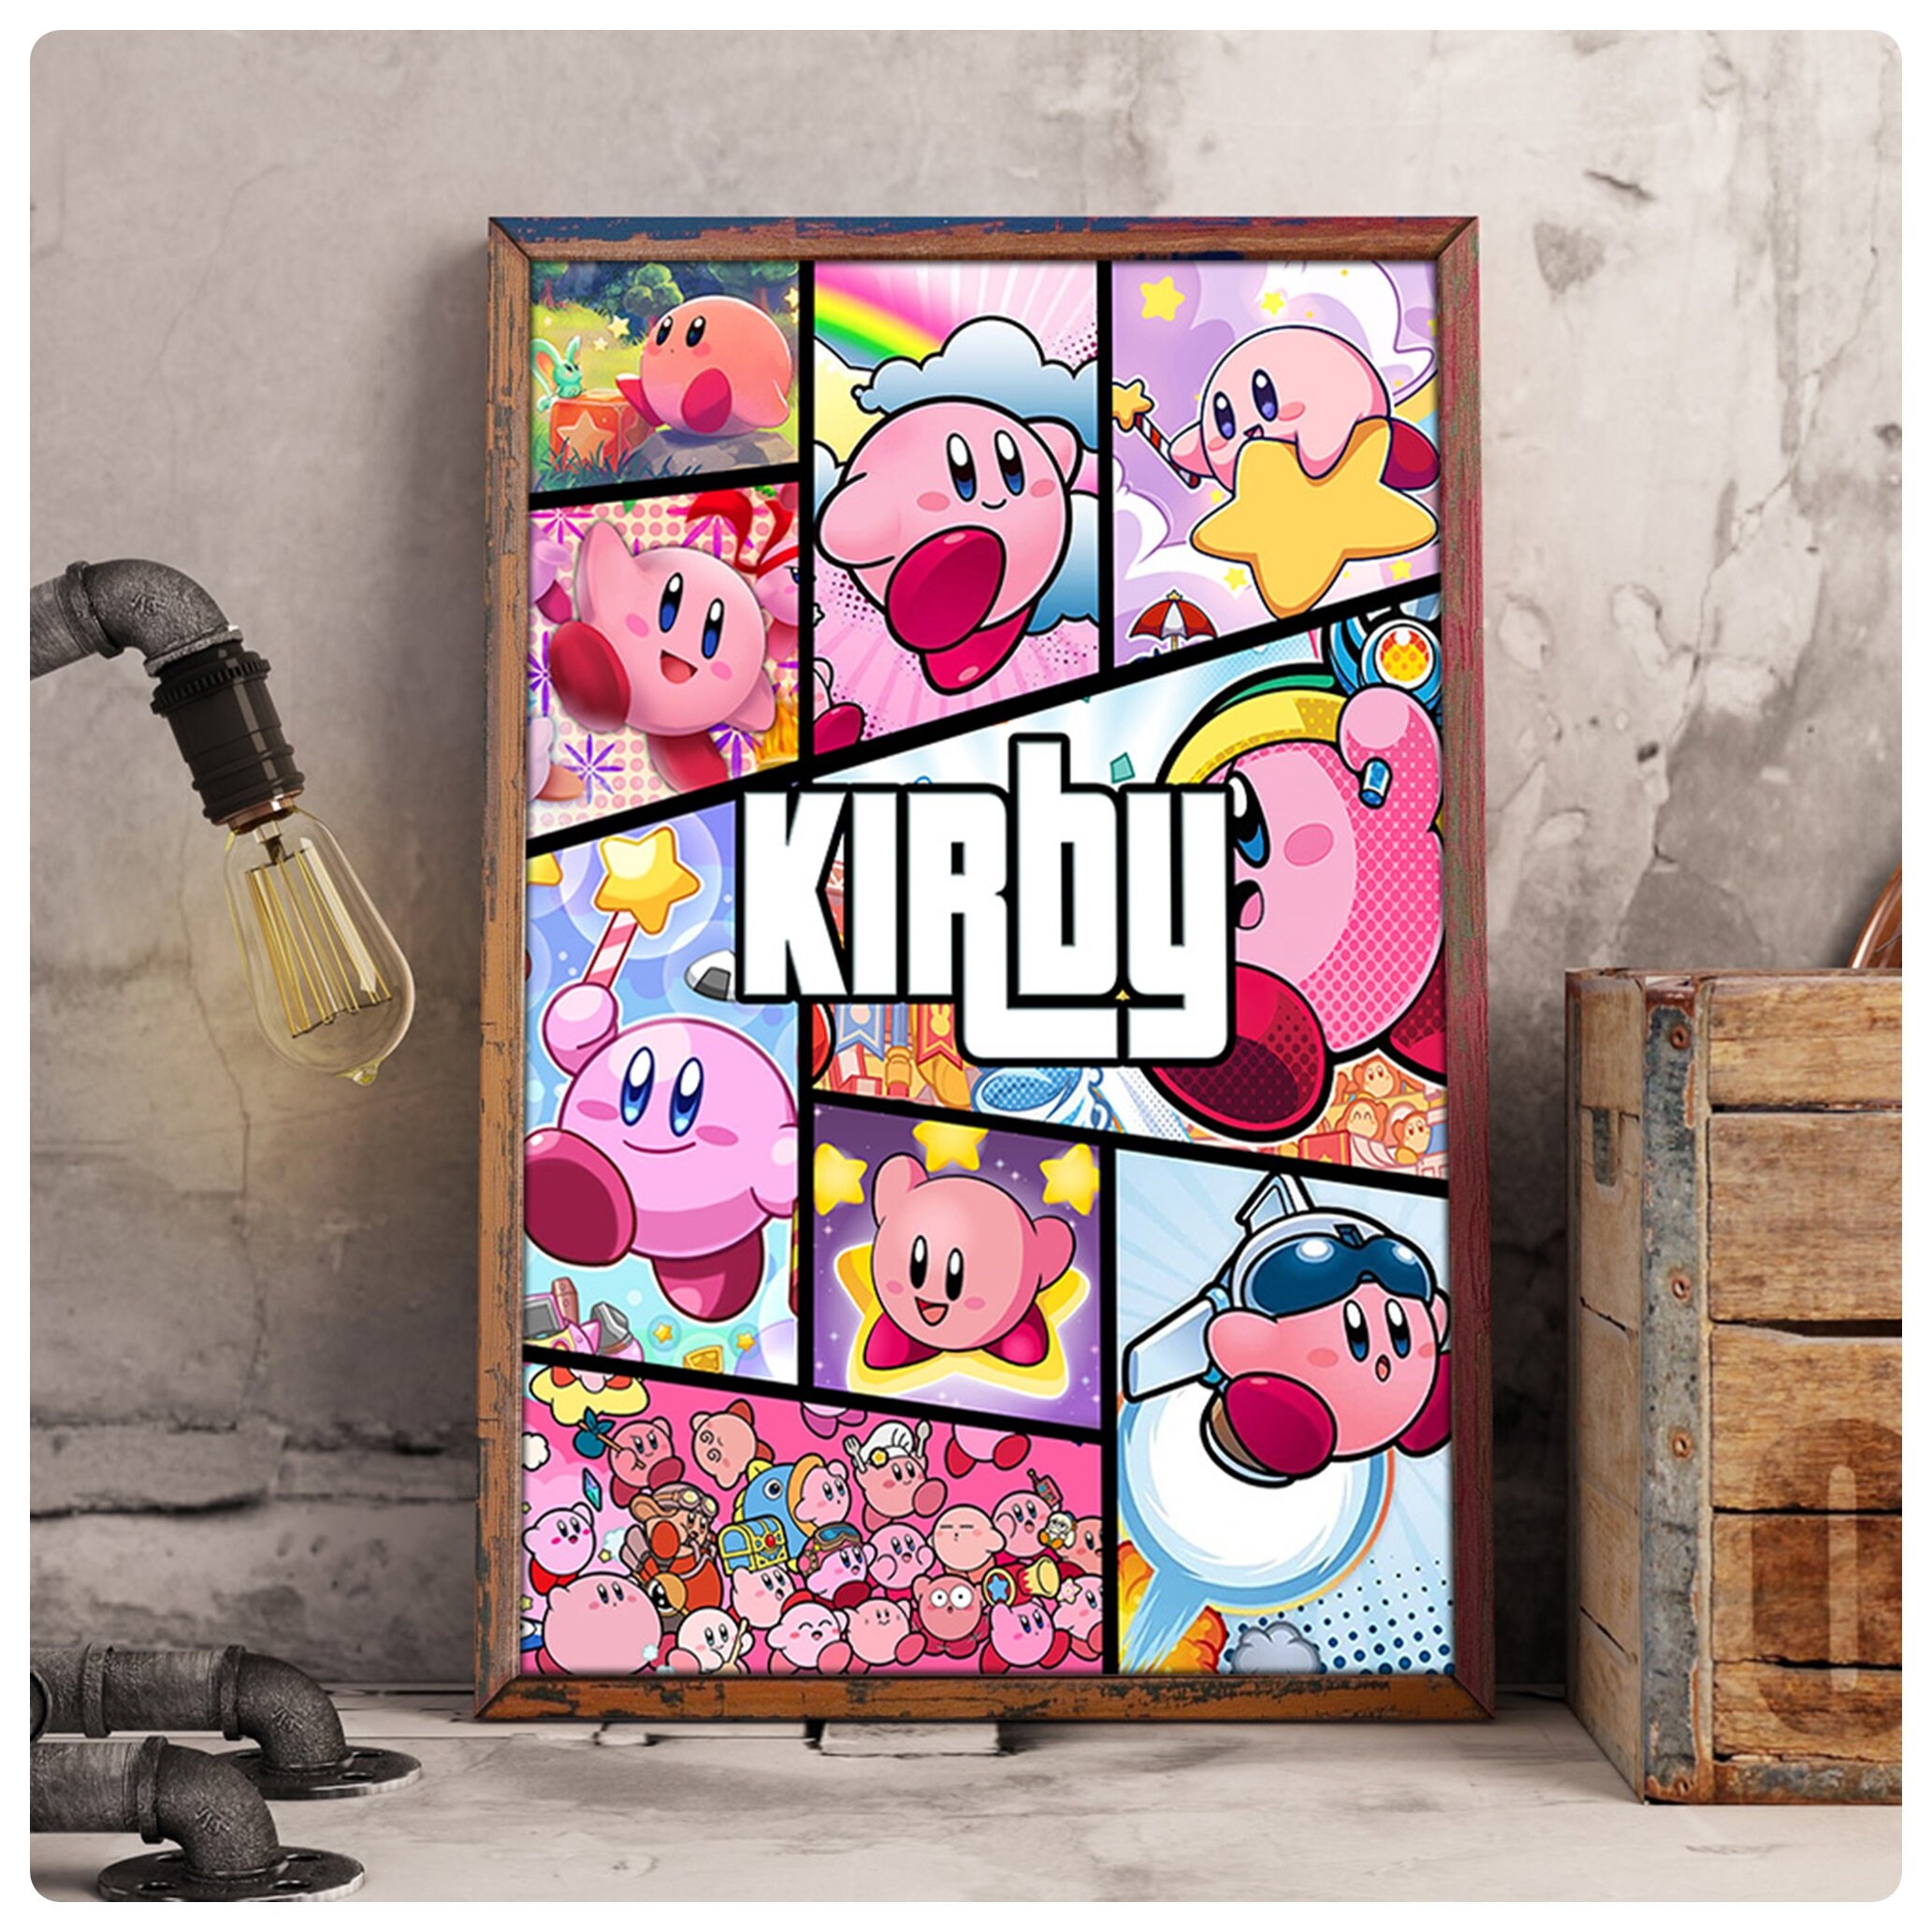 Discover Kirby GTA Style Poster | Cute Kirby Poster | Kirby Video Game Poster